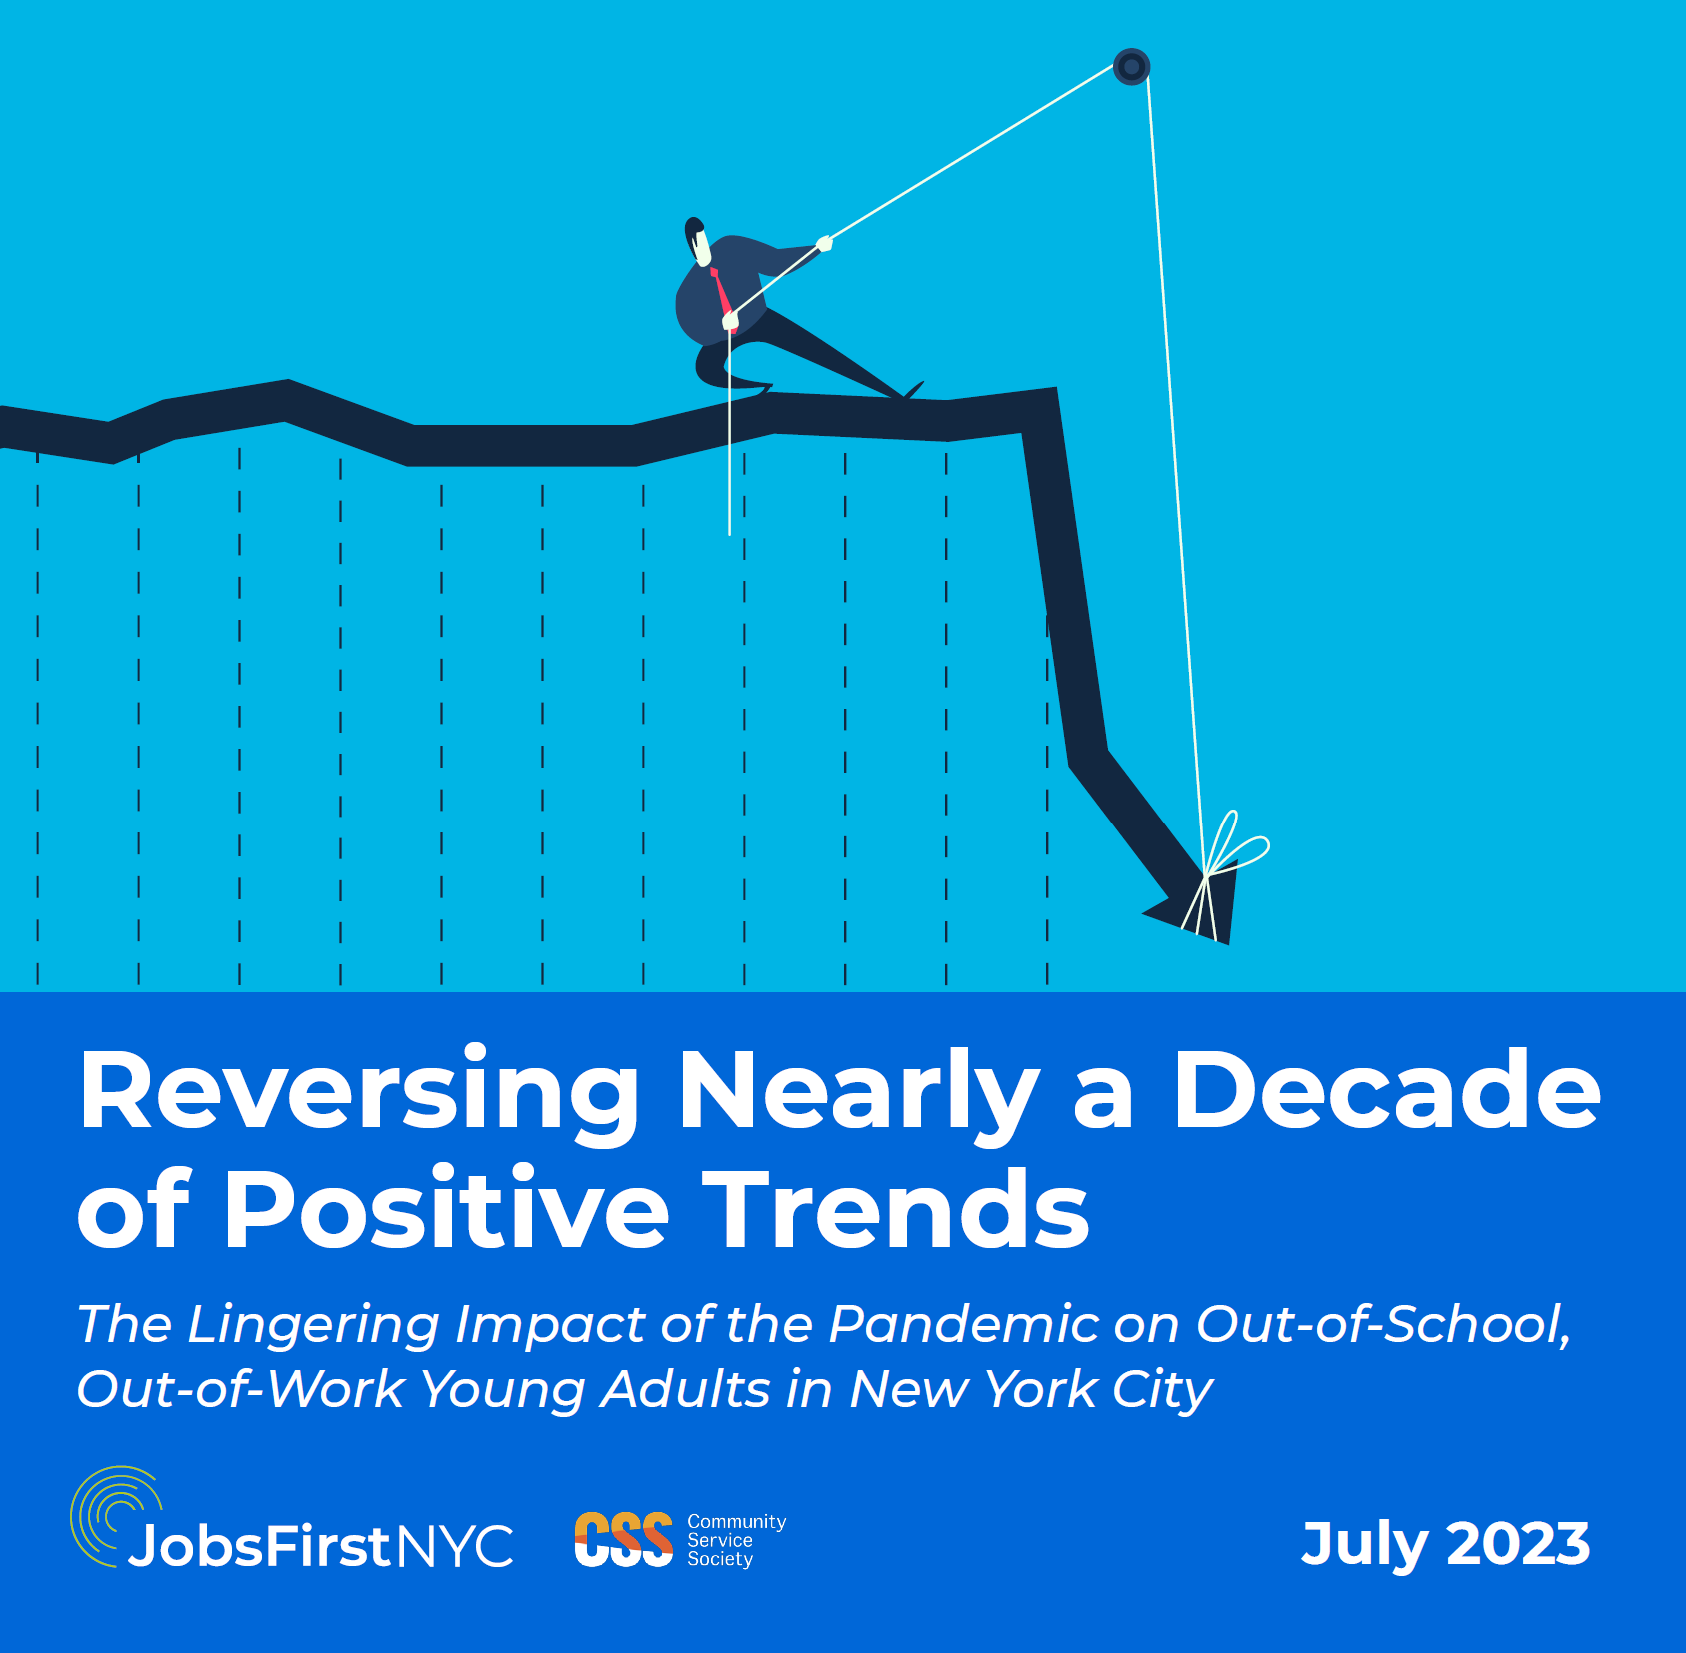 Reversing a Decade of Positive Trends: The Lingering Impact of the Pandemic on Out-of-School, Out-of-Work Young Adults in New York City